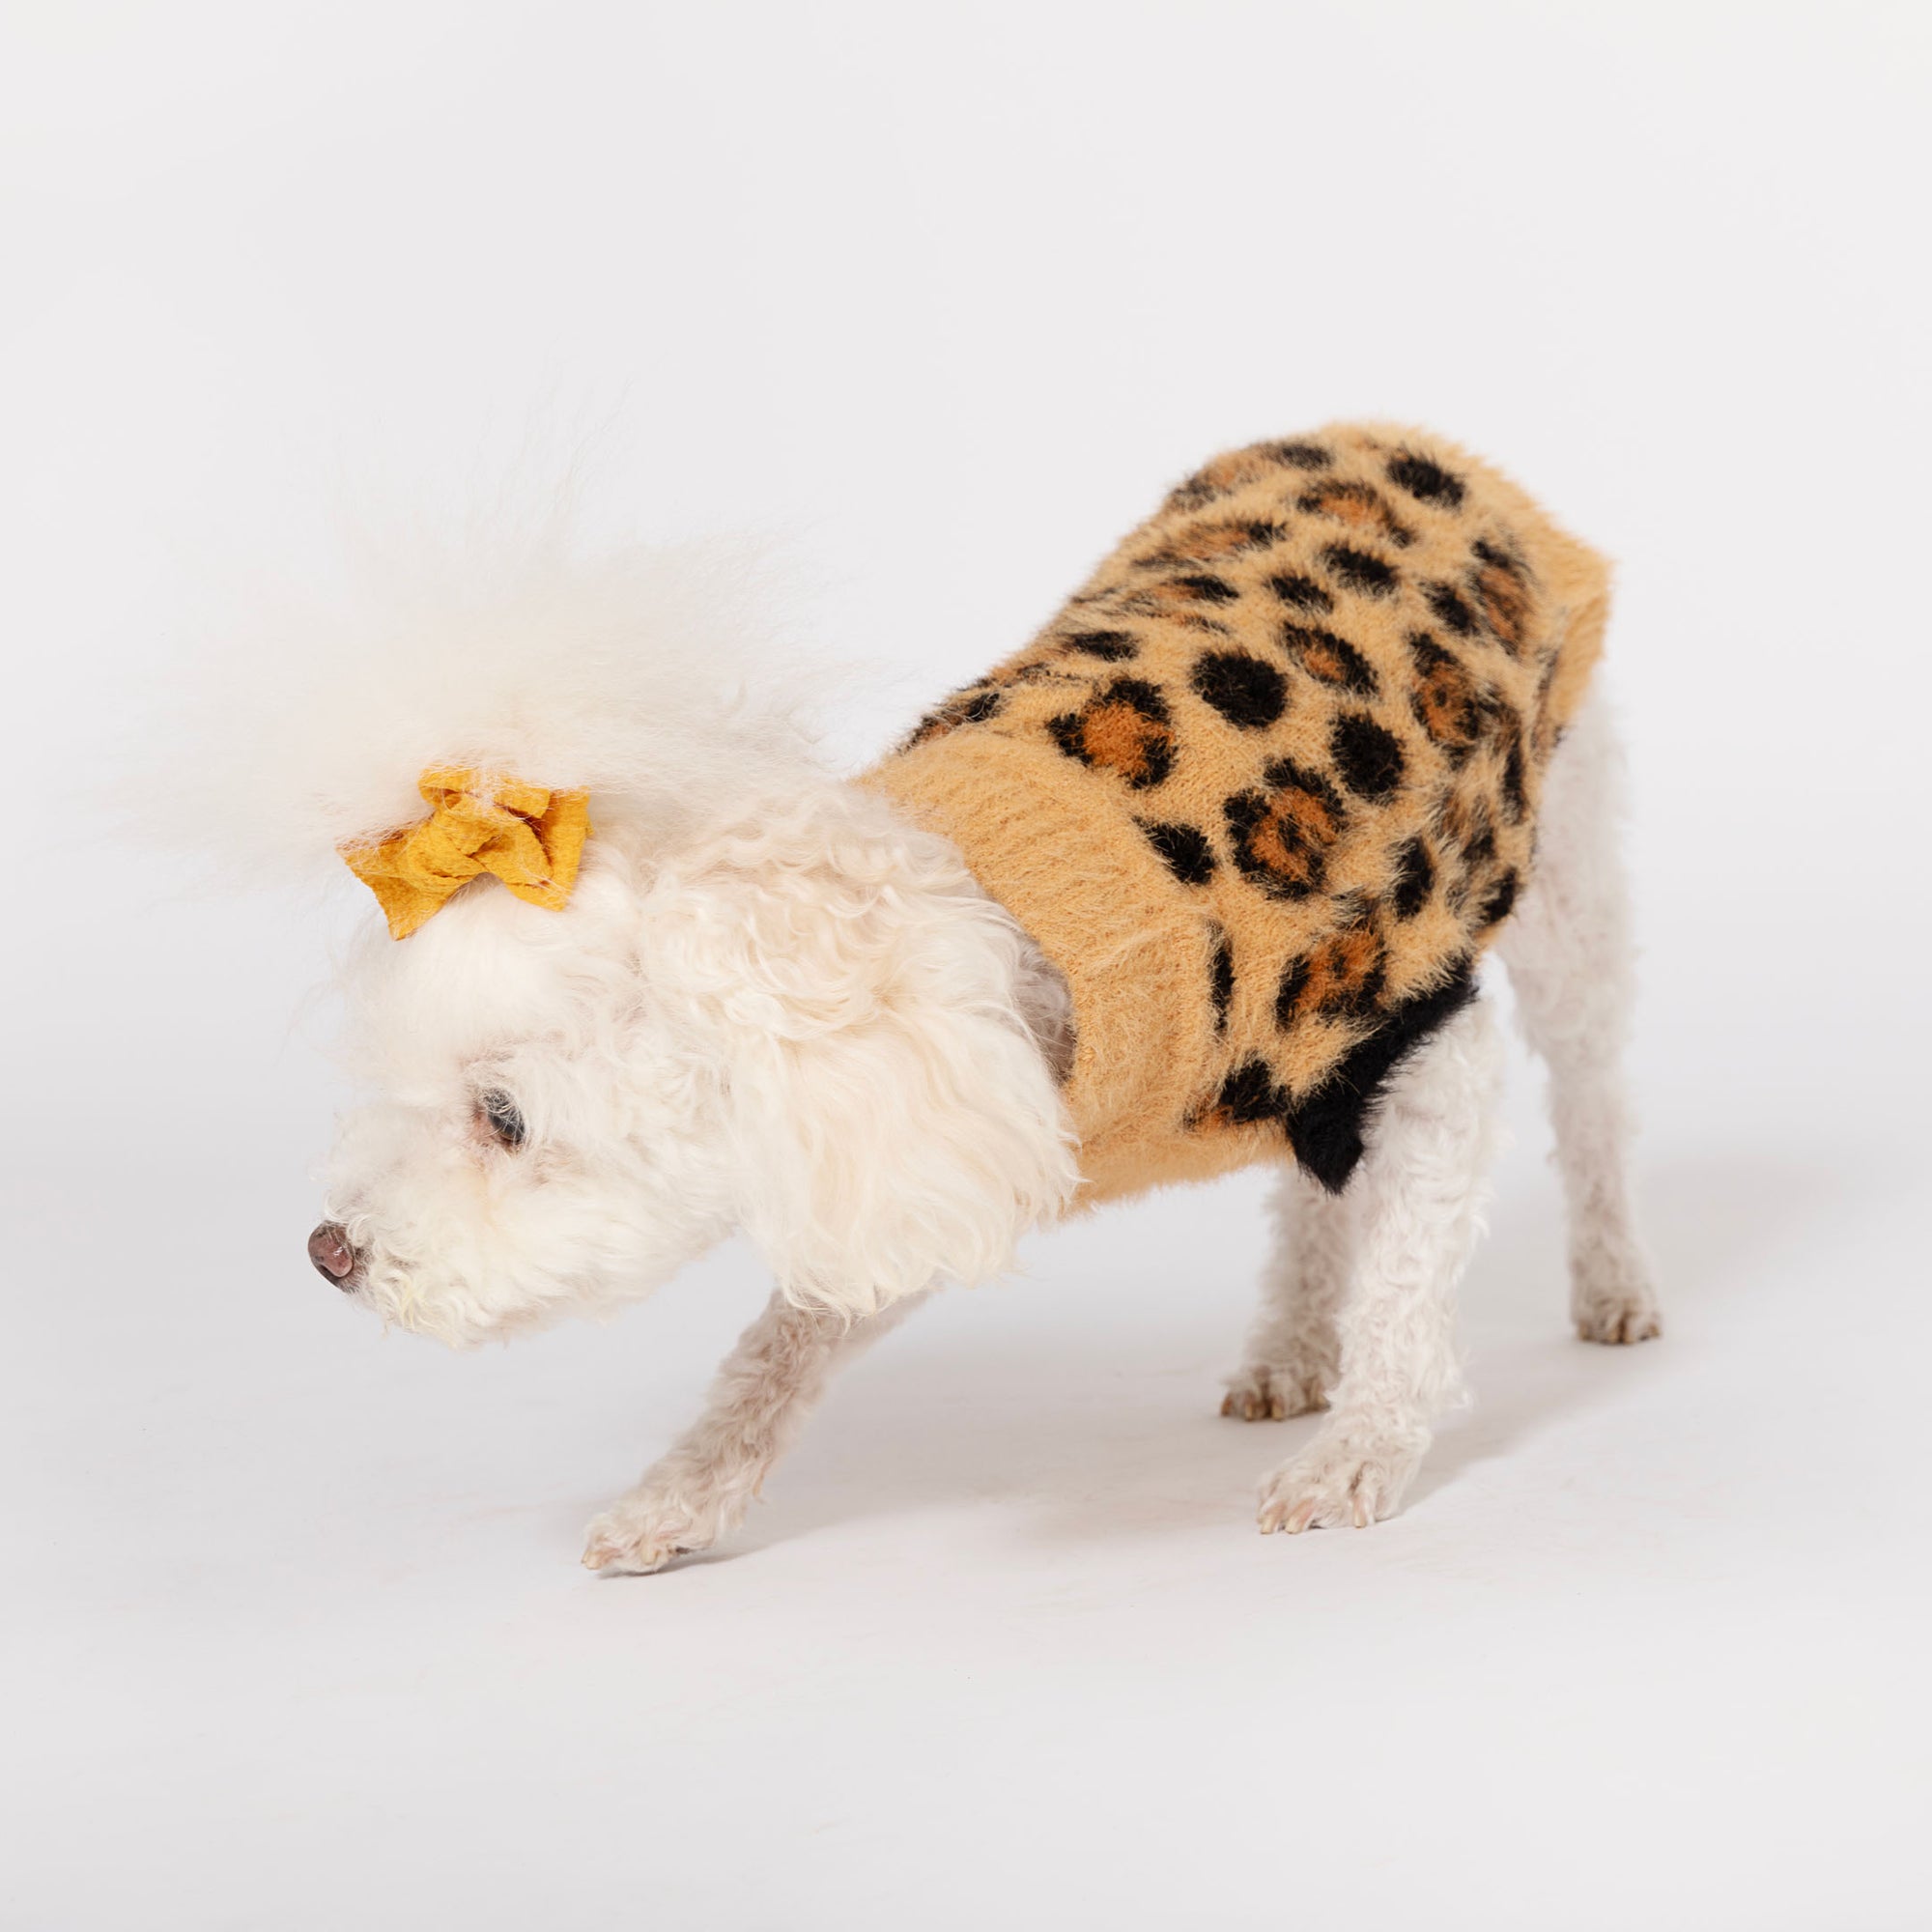 Playful white poodle in motion, dressed in a leopard print sweater with a matching yellow bow, set against a simple white backdrop.